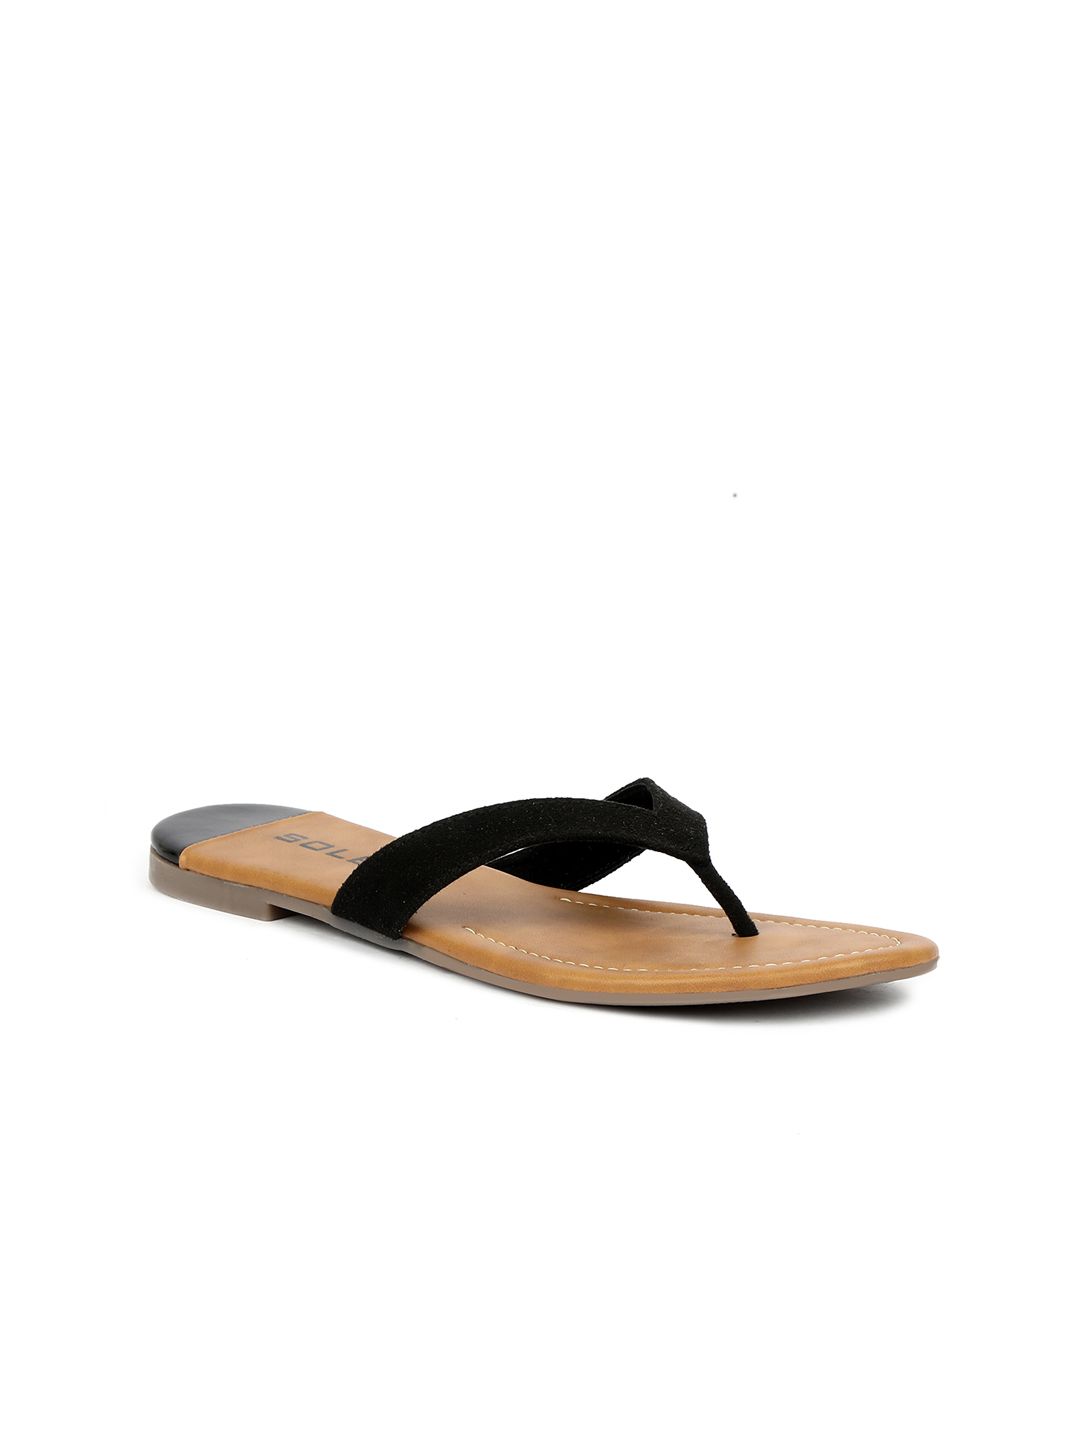 SOLES Open Toe T-Strap Flats Price in India